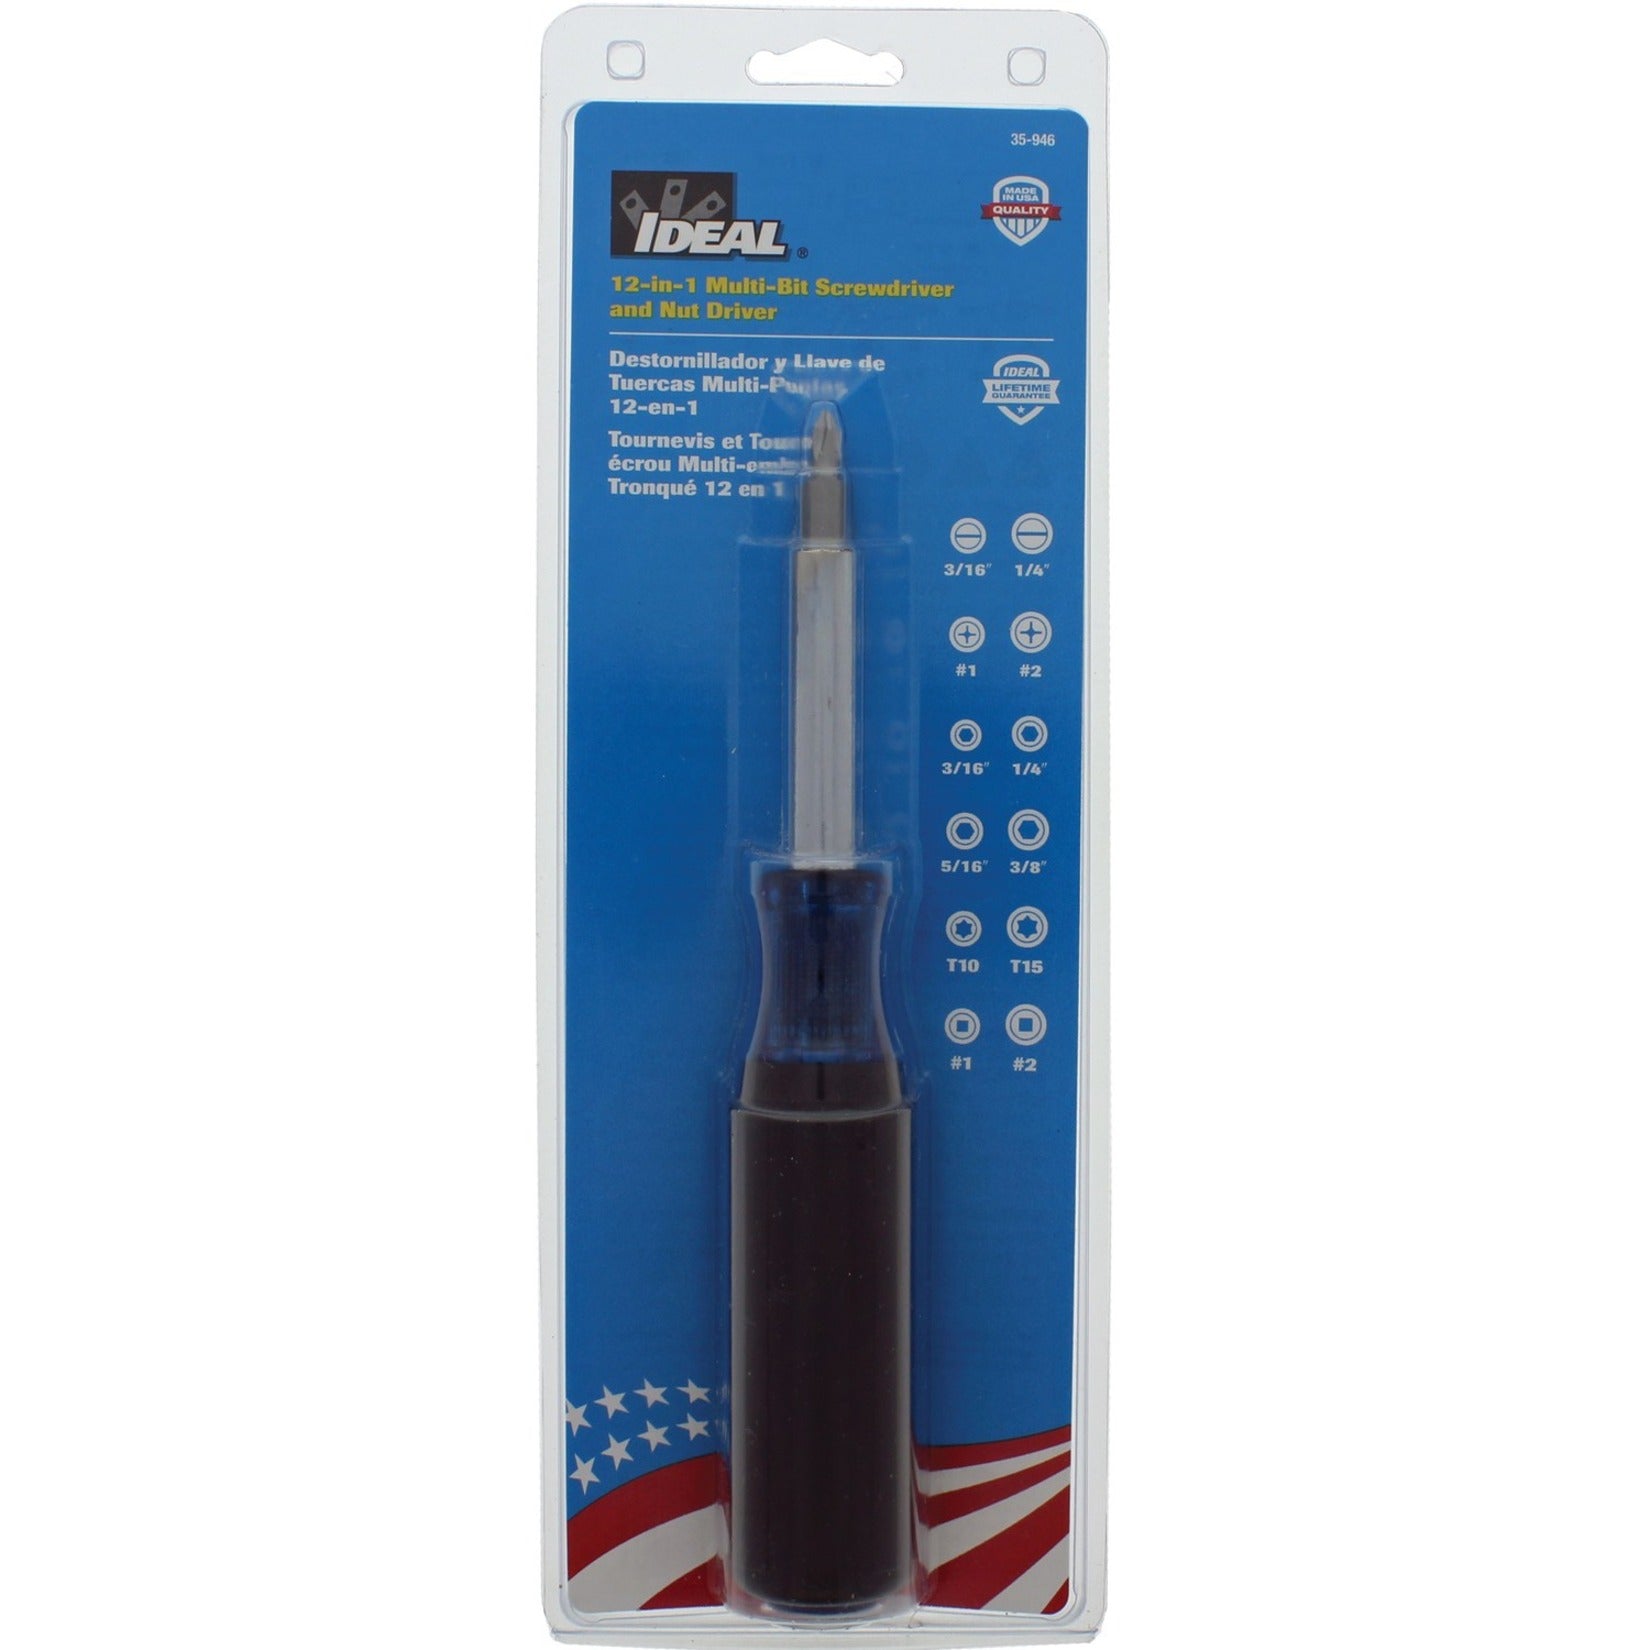 IDEAL 35-946 12-in-1 Multi-Bit Screwdriver & Nut Driver, Versatile and Convenient Tool for Various Tasks